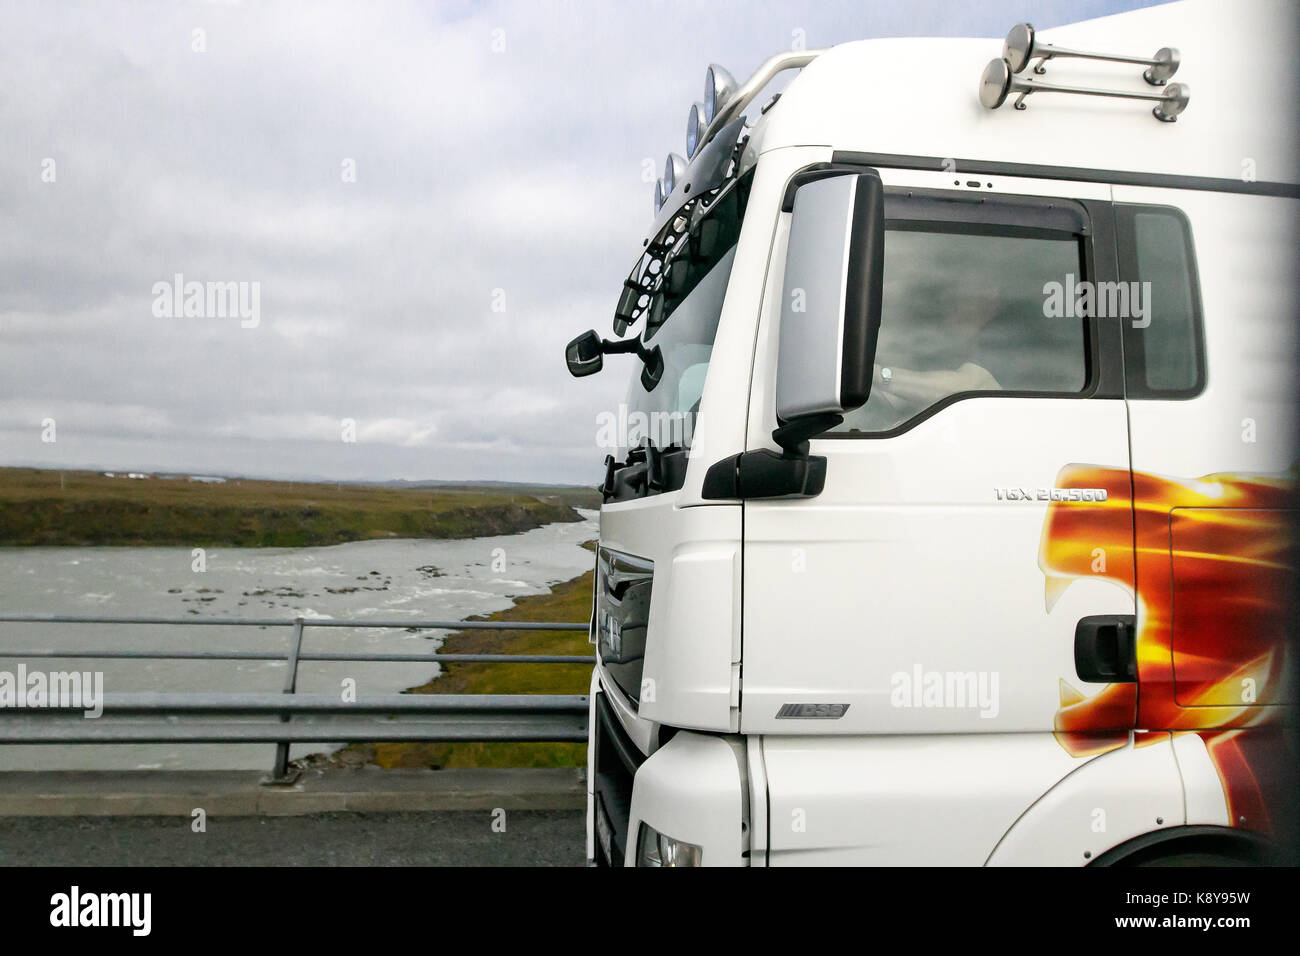 Speeding truck on a road in Iceland as seen from a minibus in the adjacent lane. Stock Photo